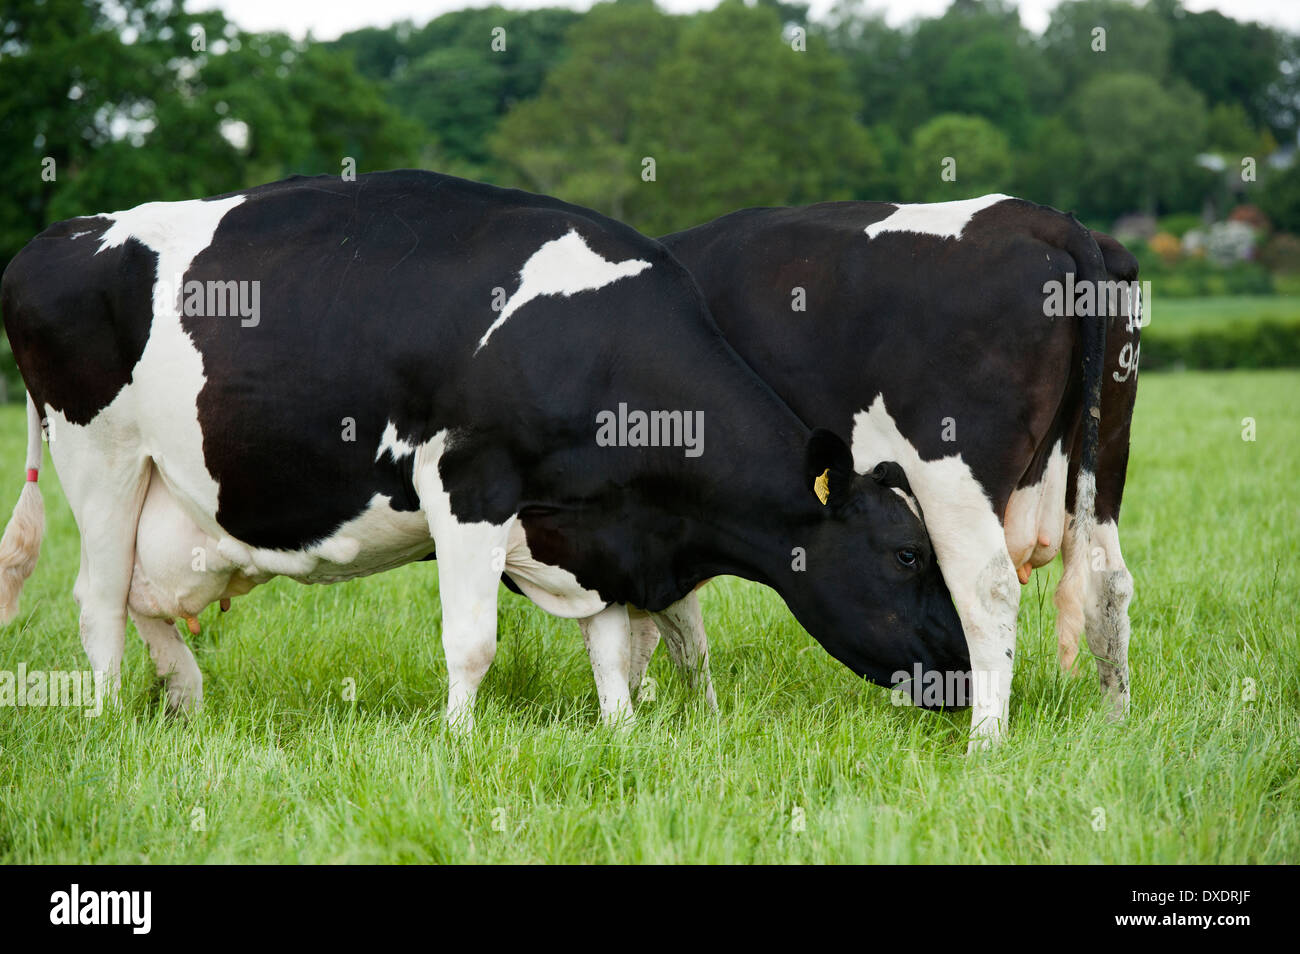 Dairy cows pushing each other in field. Cumbria, UK. Stock Photo